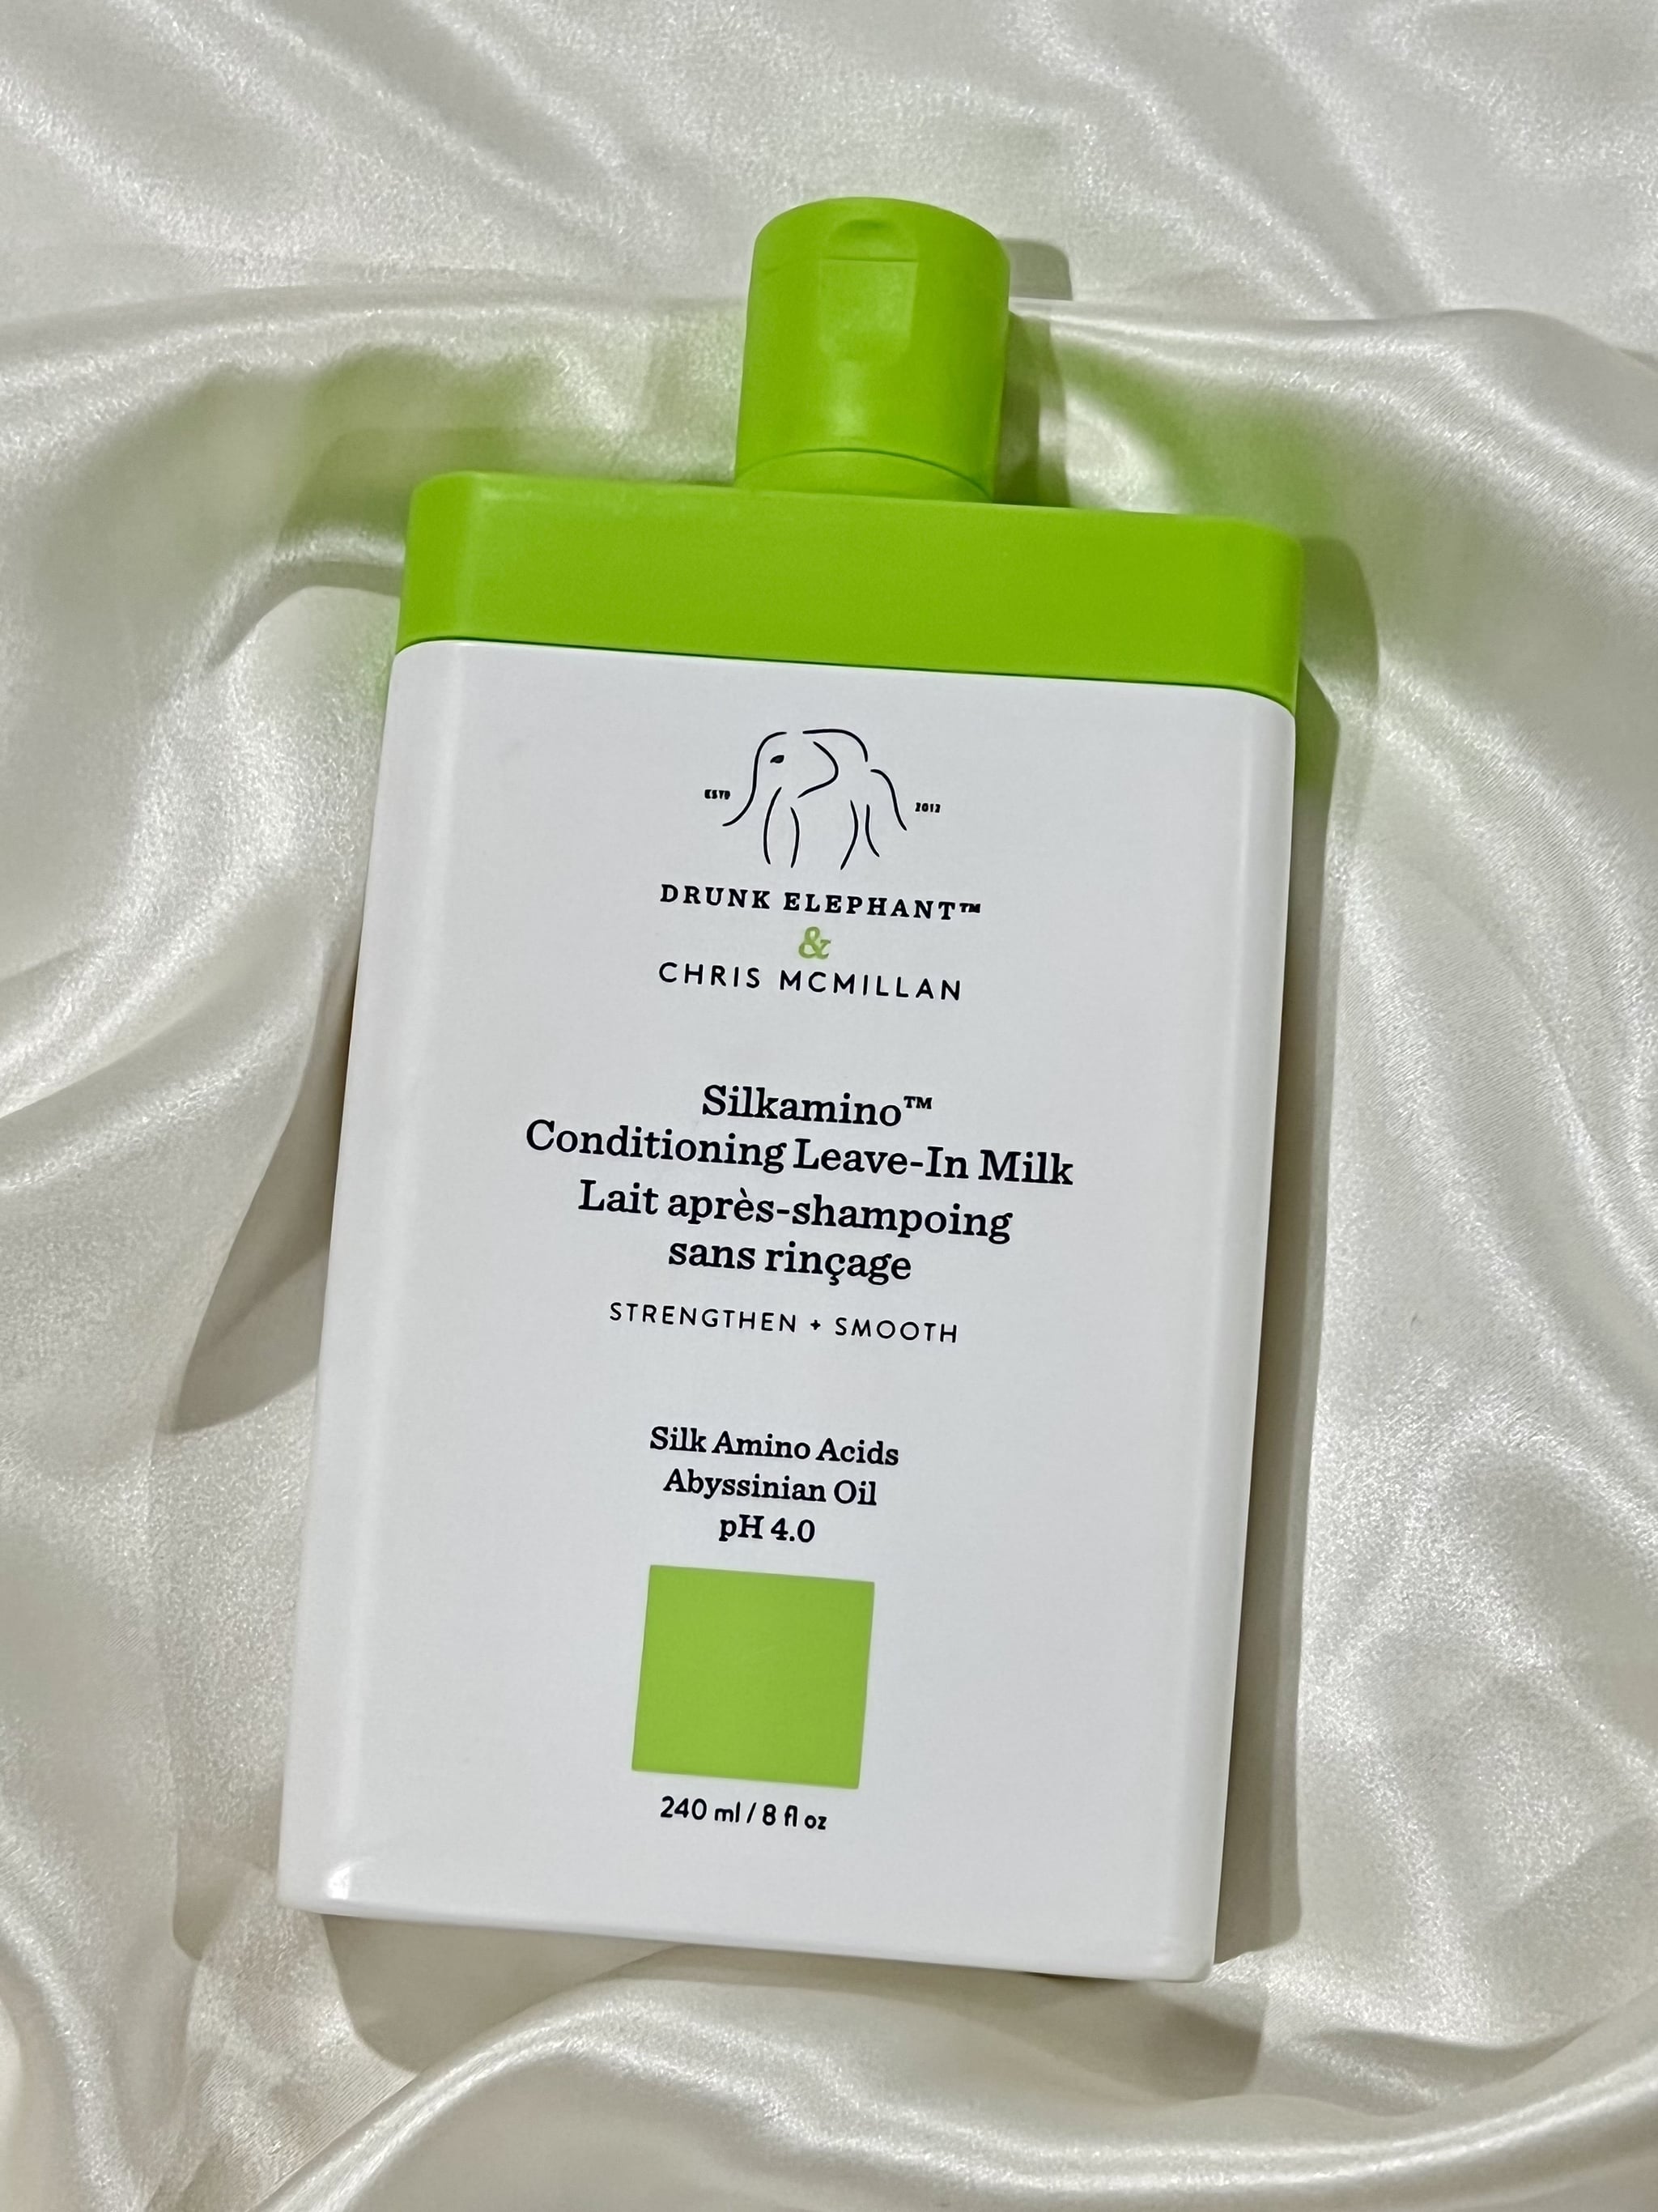 Drunk Elephant Silkamino Conditioning Leave-In Milk Review | POPSUGAR Beauty